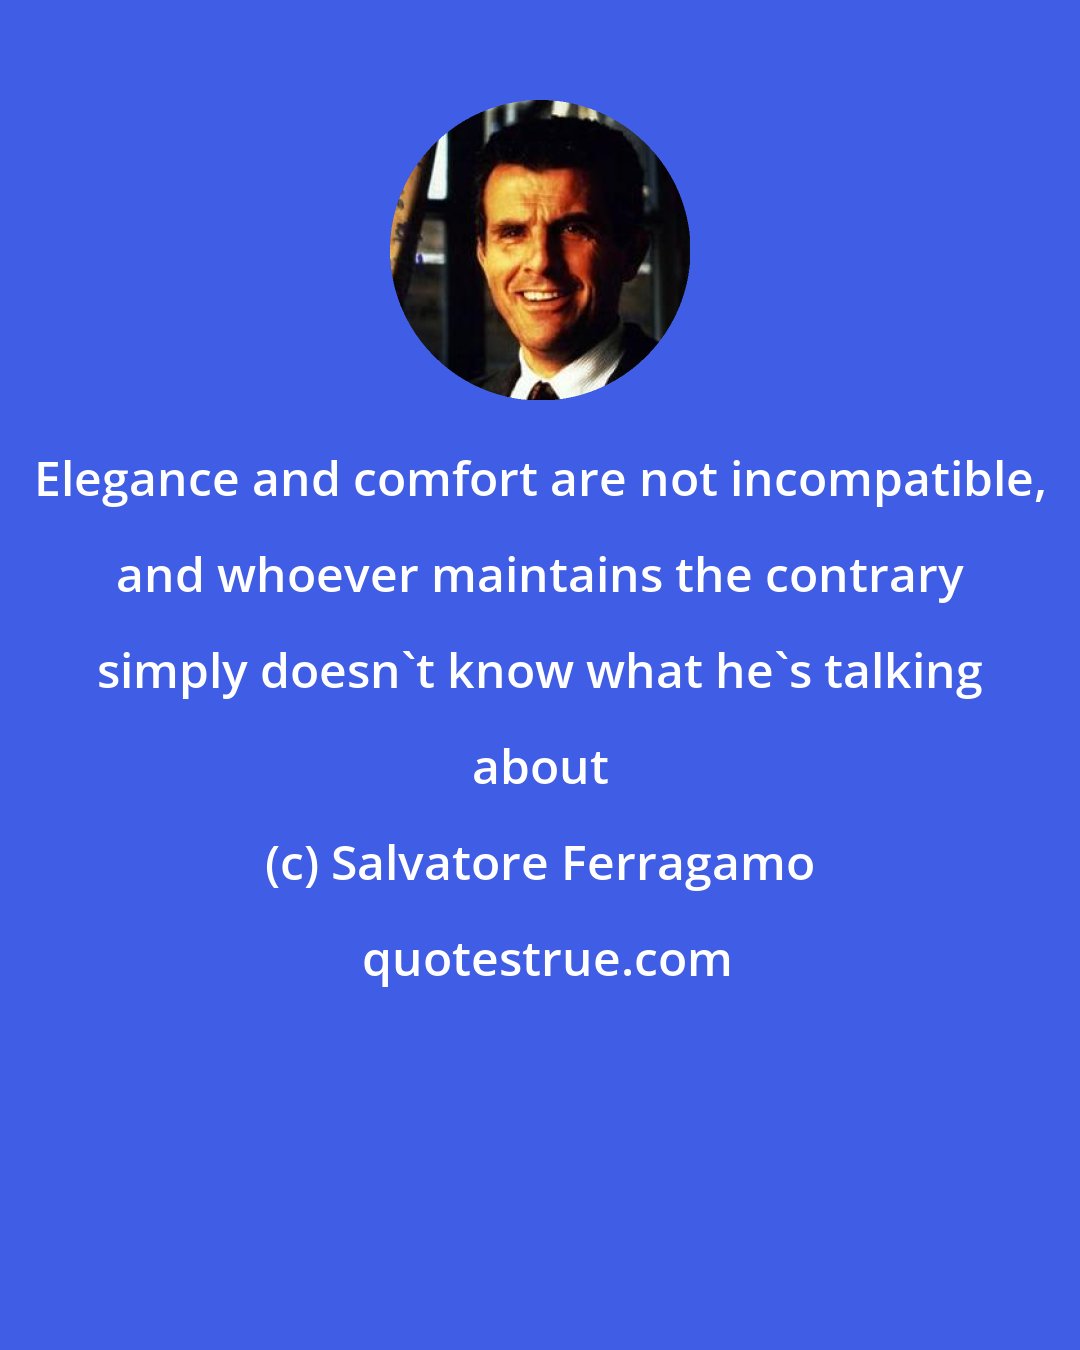 Salvatore Ferragamo: Elegance and comfort are not incompatible, and whoever maintains the contrary simply doesn't know what he's talking about